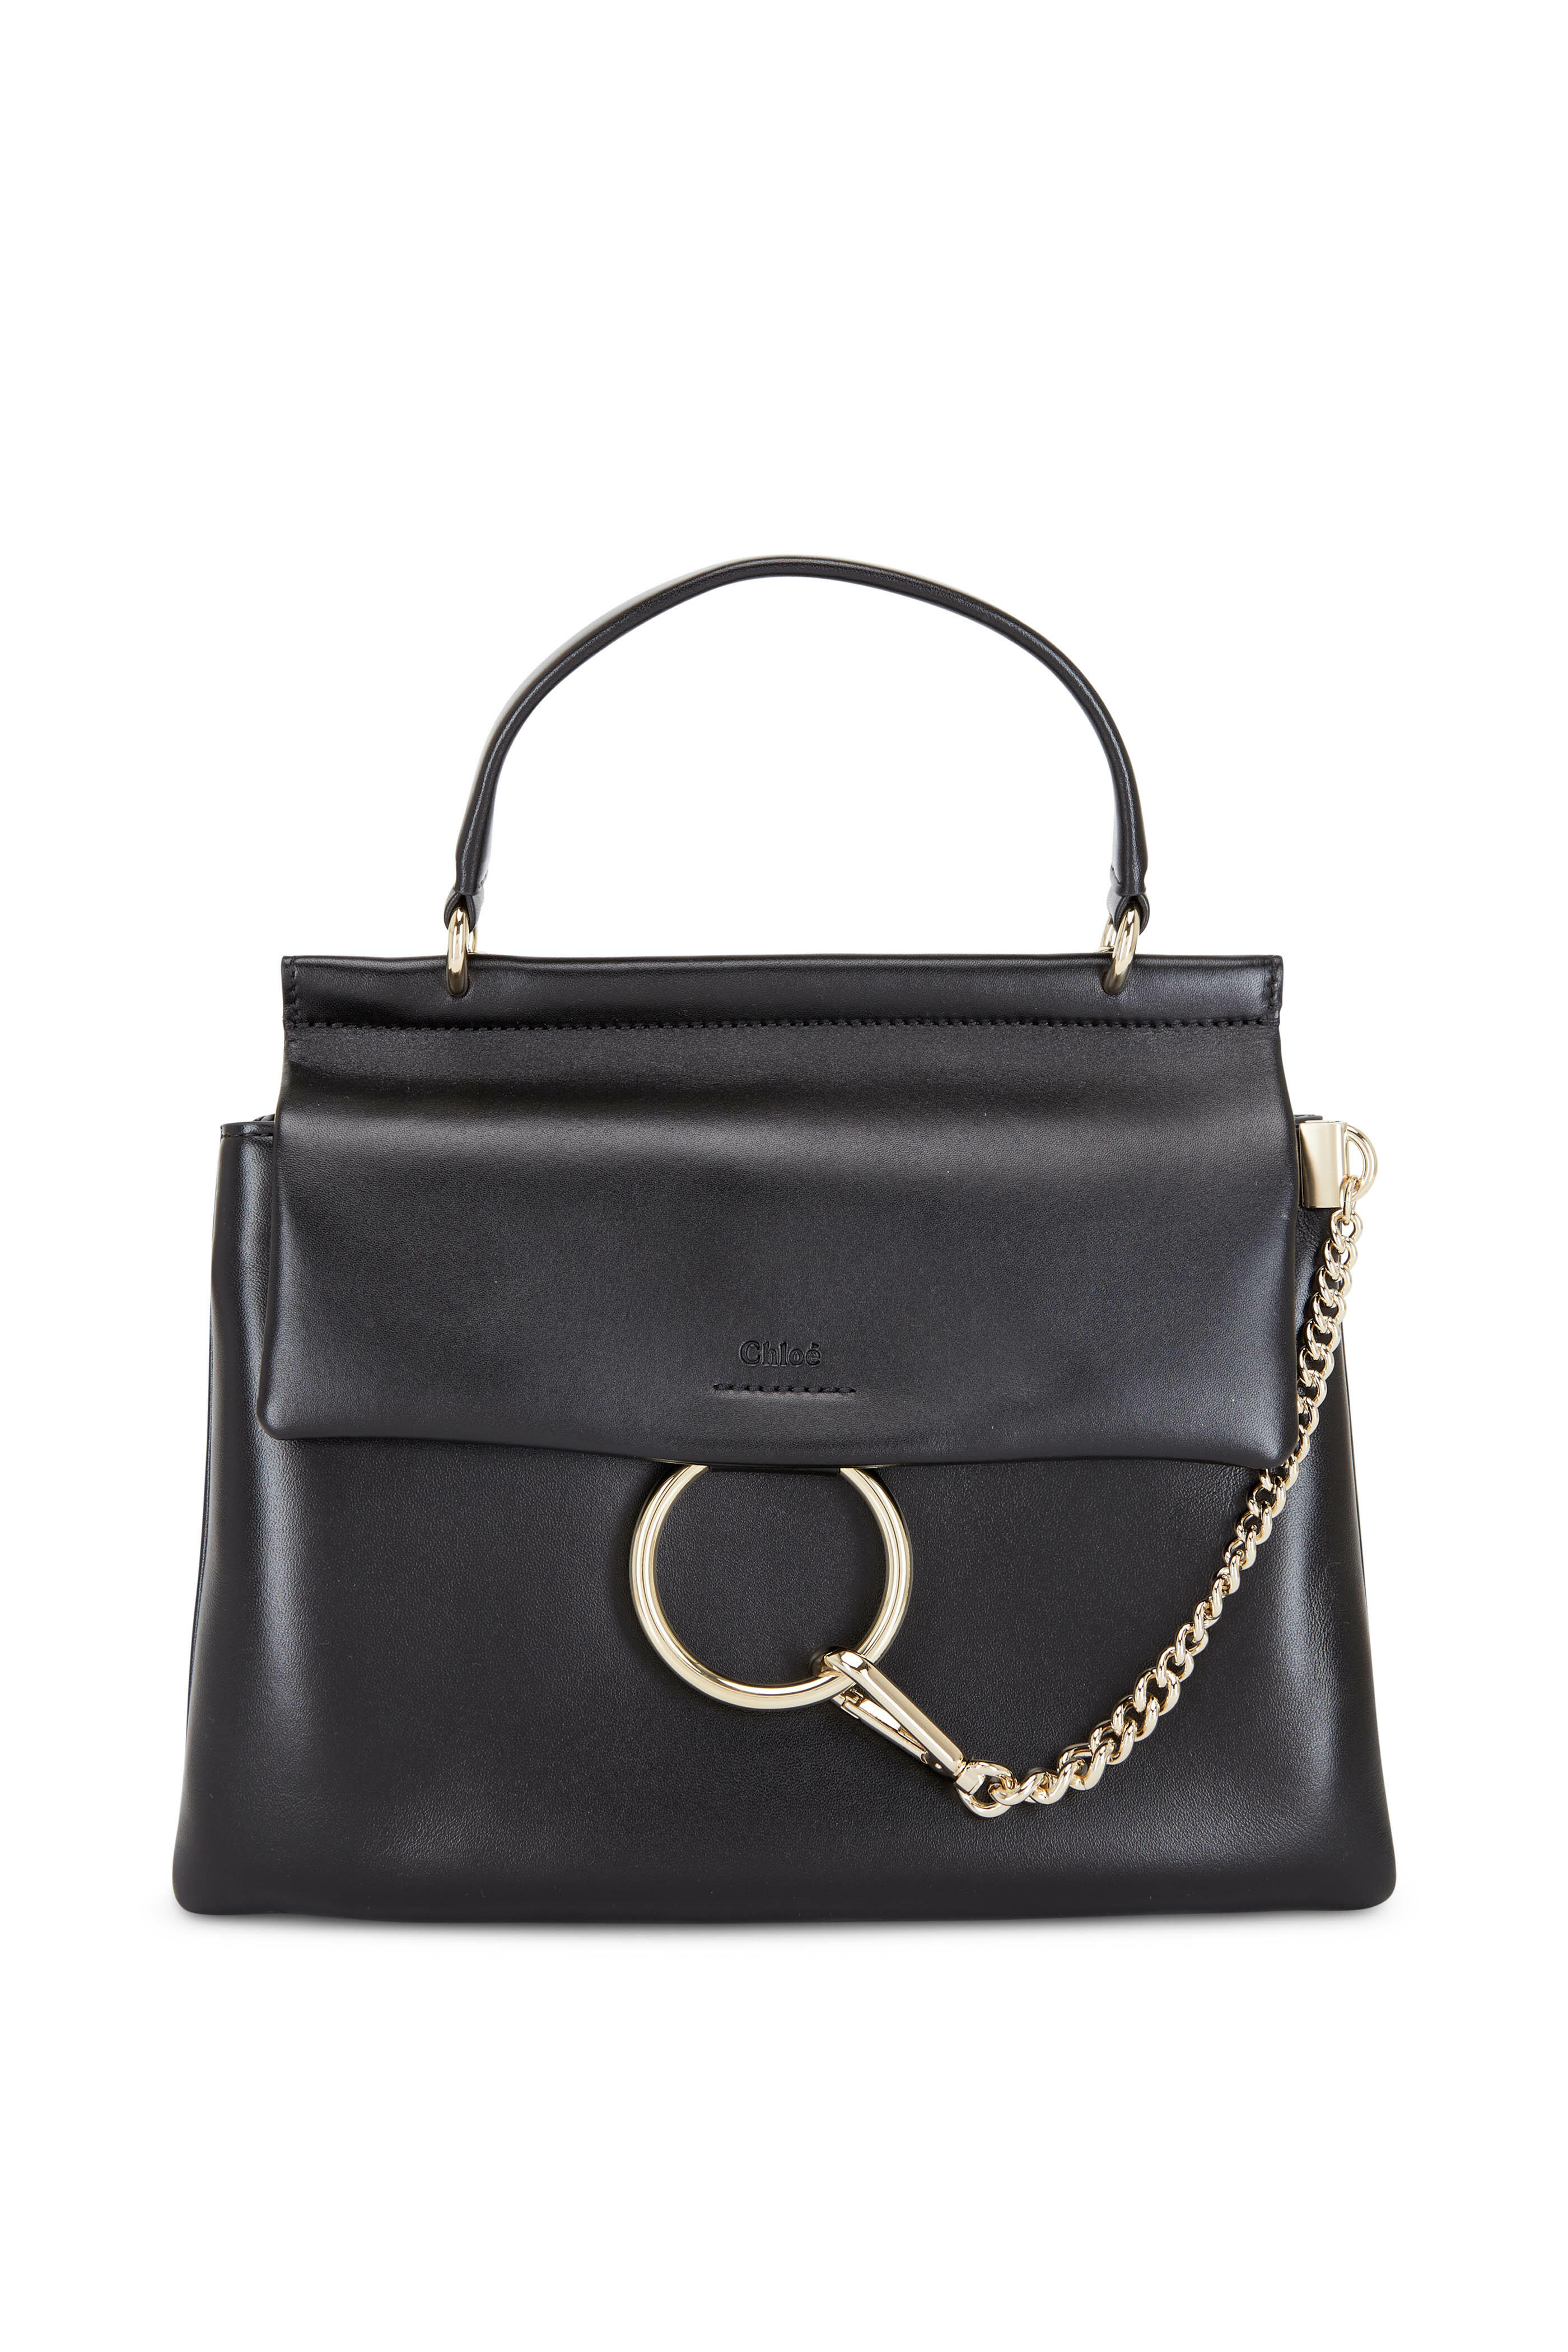 Chloé Faye Large Leather Day Bag